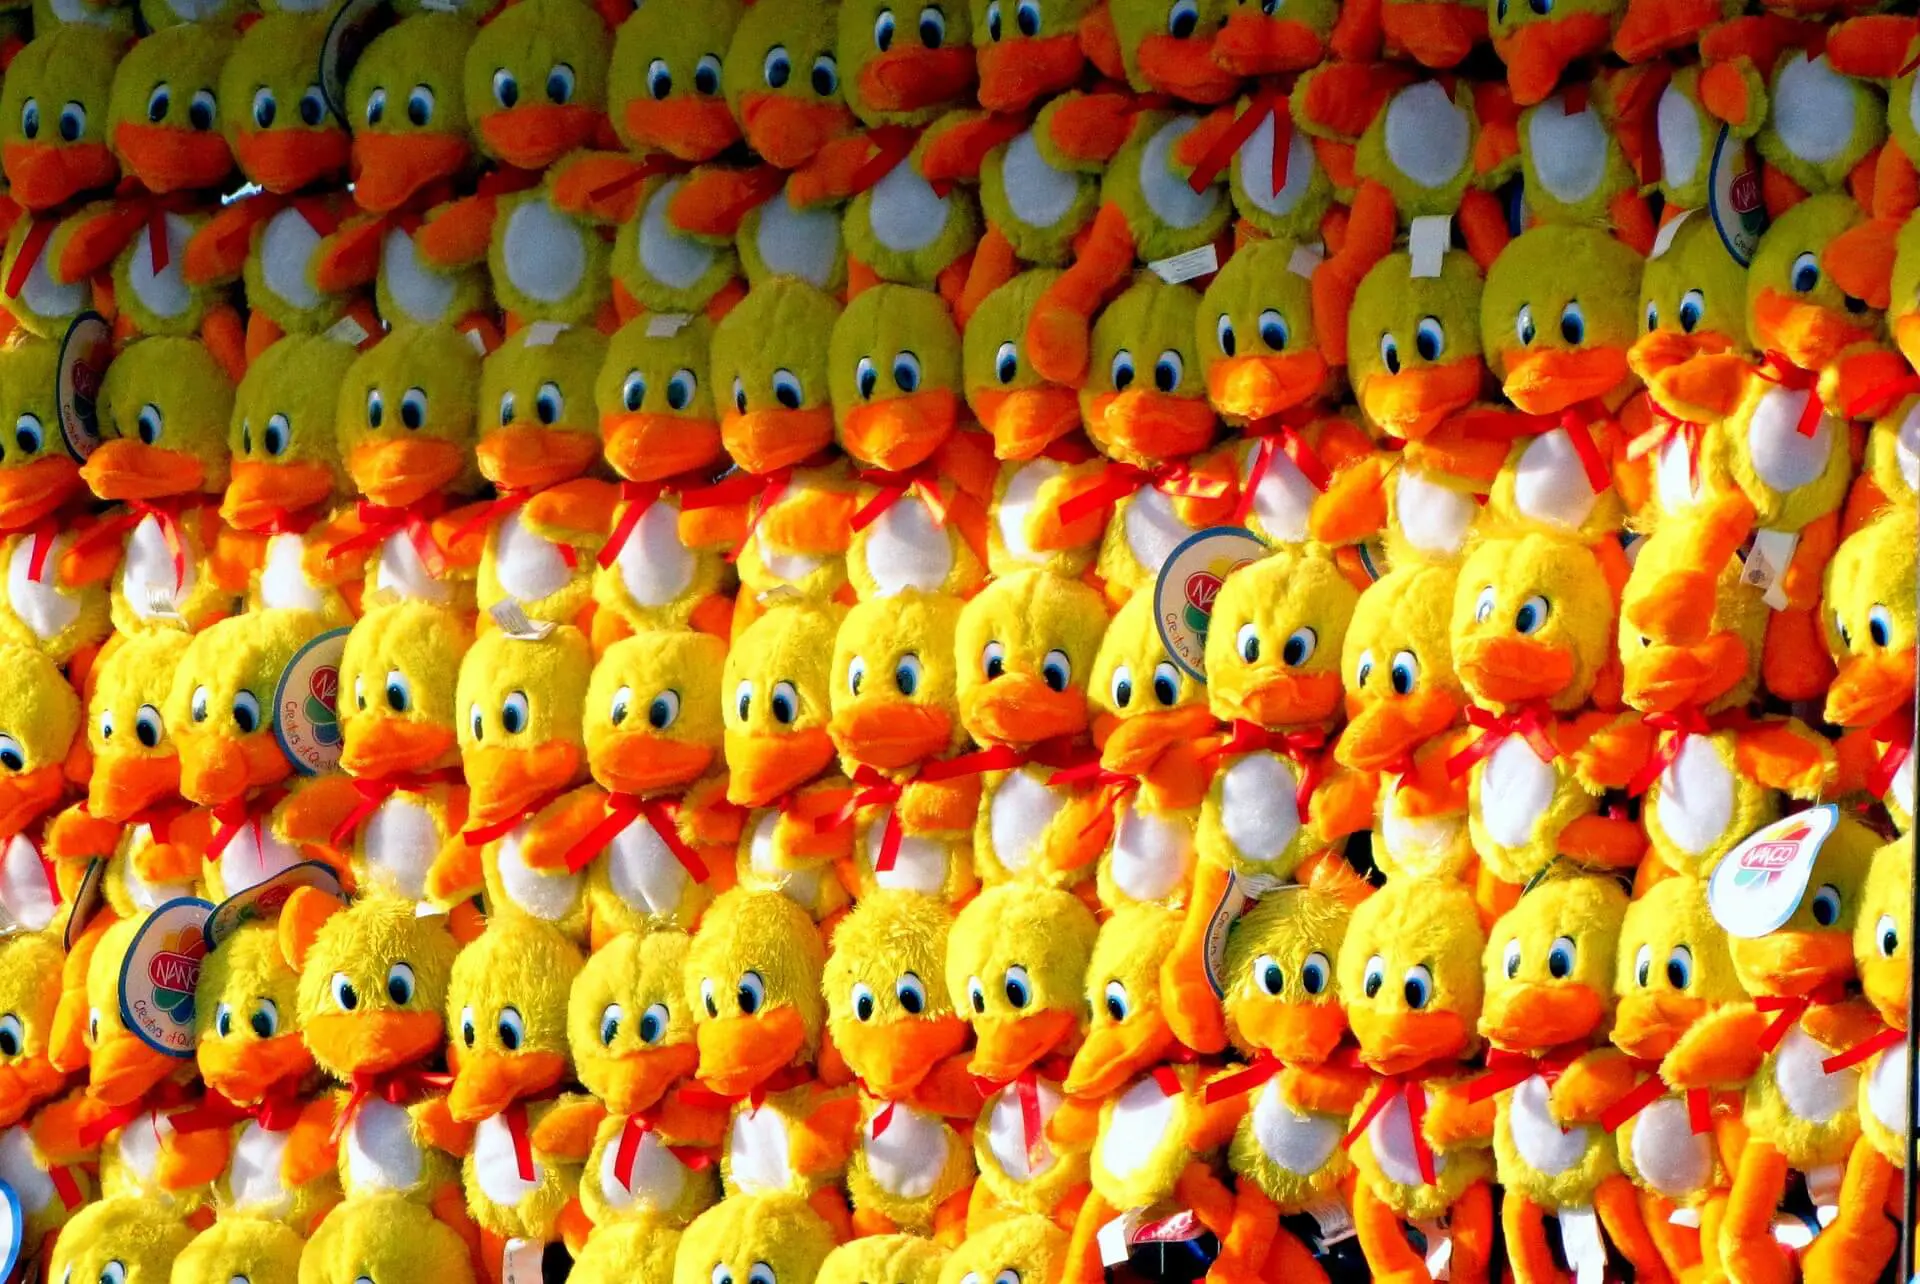 A wall of stuffed ducks with yellow and orange colors.